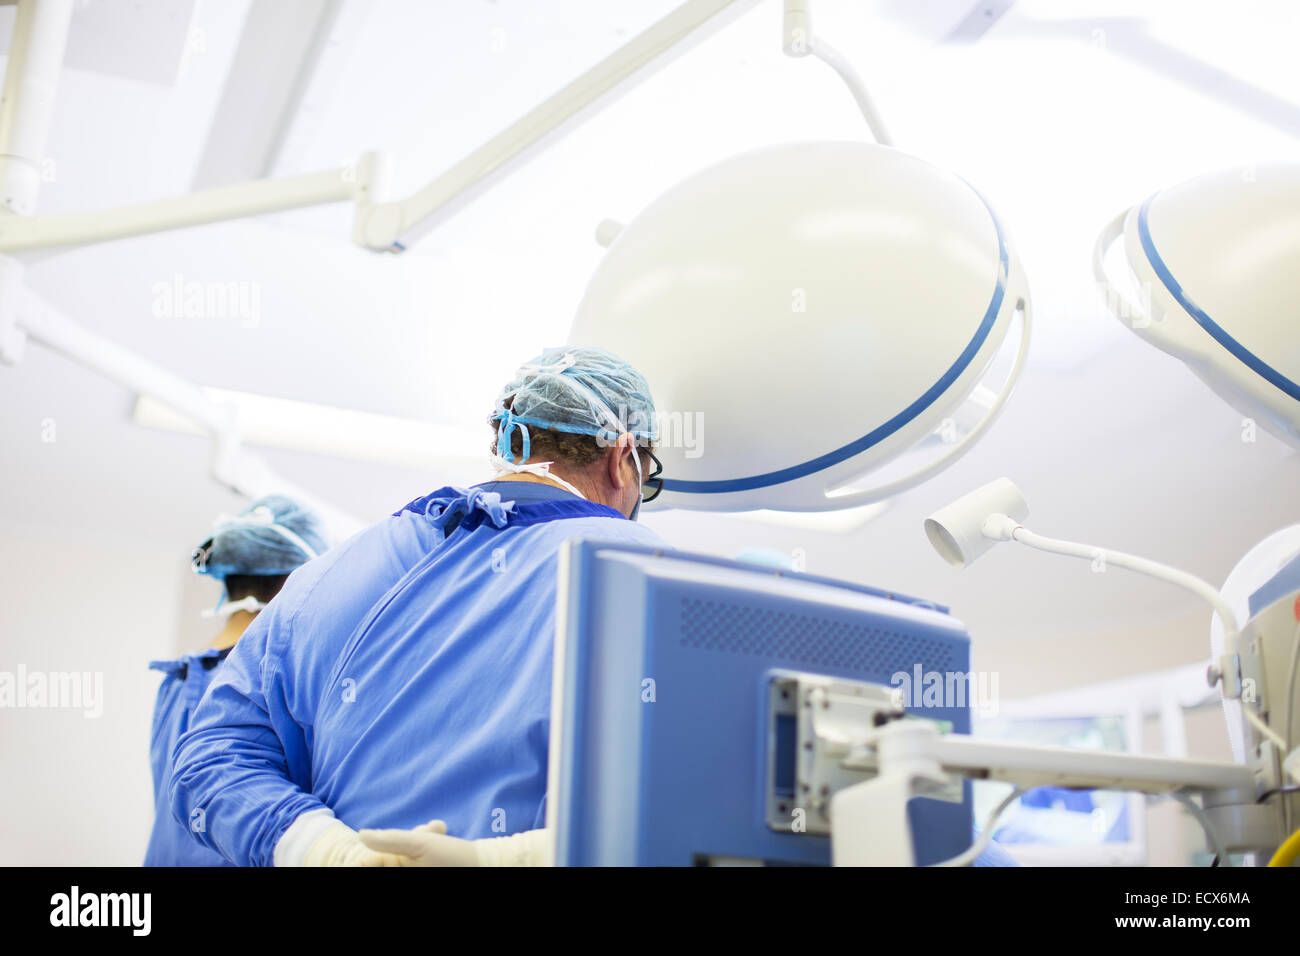 Rear view of doctor wearing surgical cap, mask and gown in operating theater Stock Photo